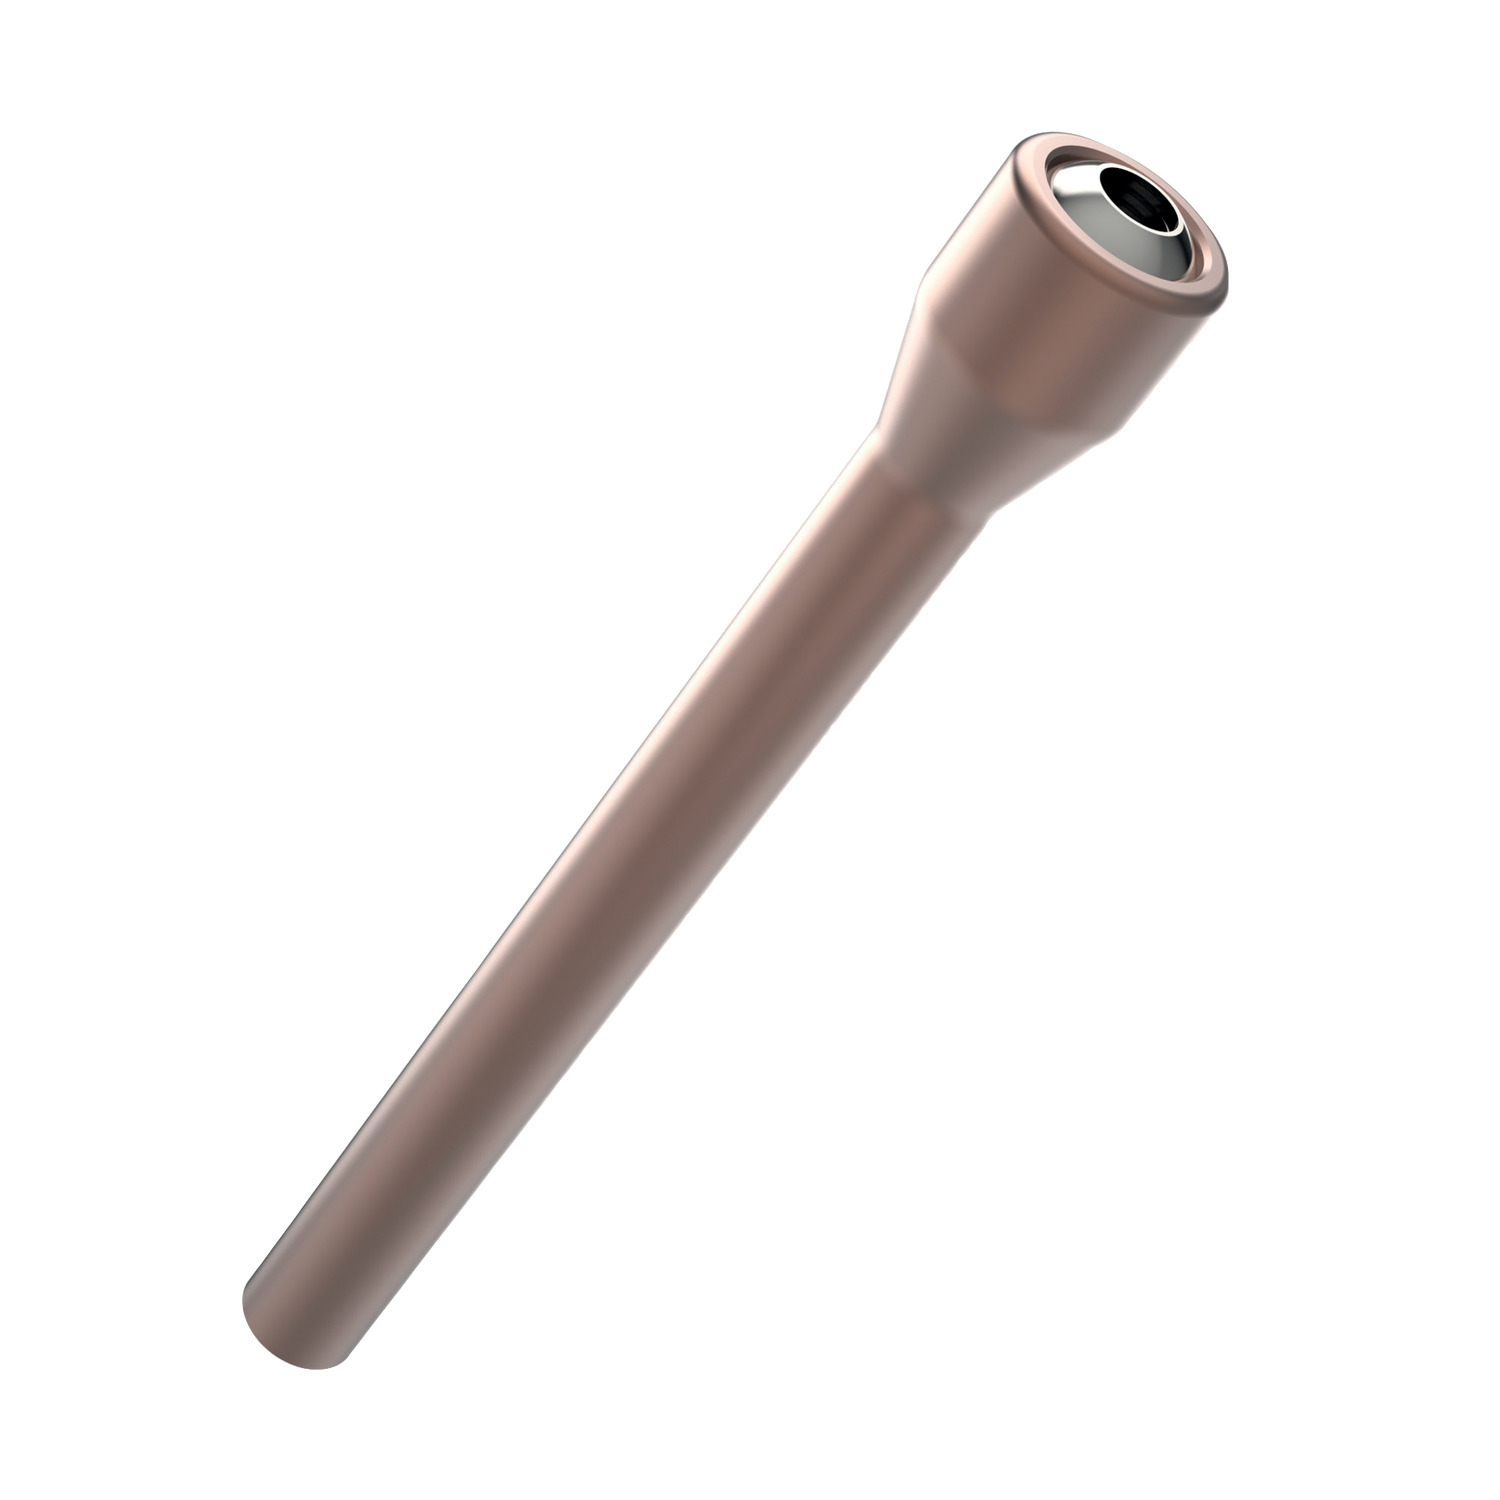 Directional Spray - Single Tube Copper tube with acetal insert and stainless steel ball. Adjust direction of spray through ball tip. For use up to 33 bars. Temperature resistant to 70°C.